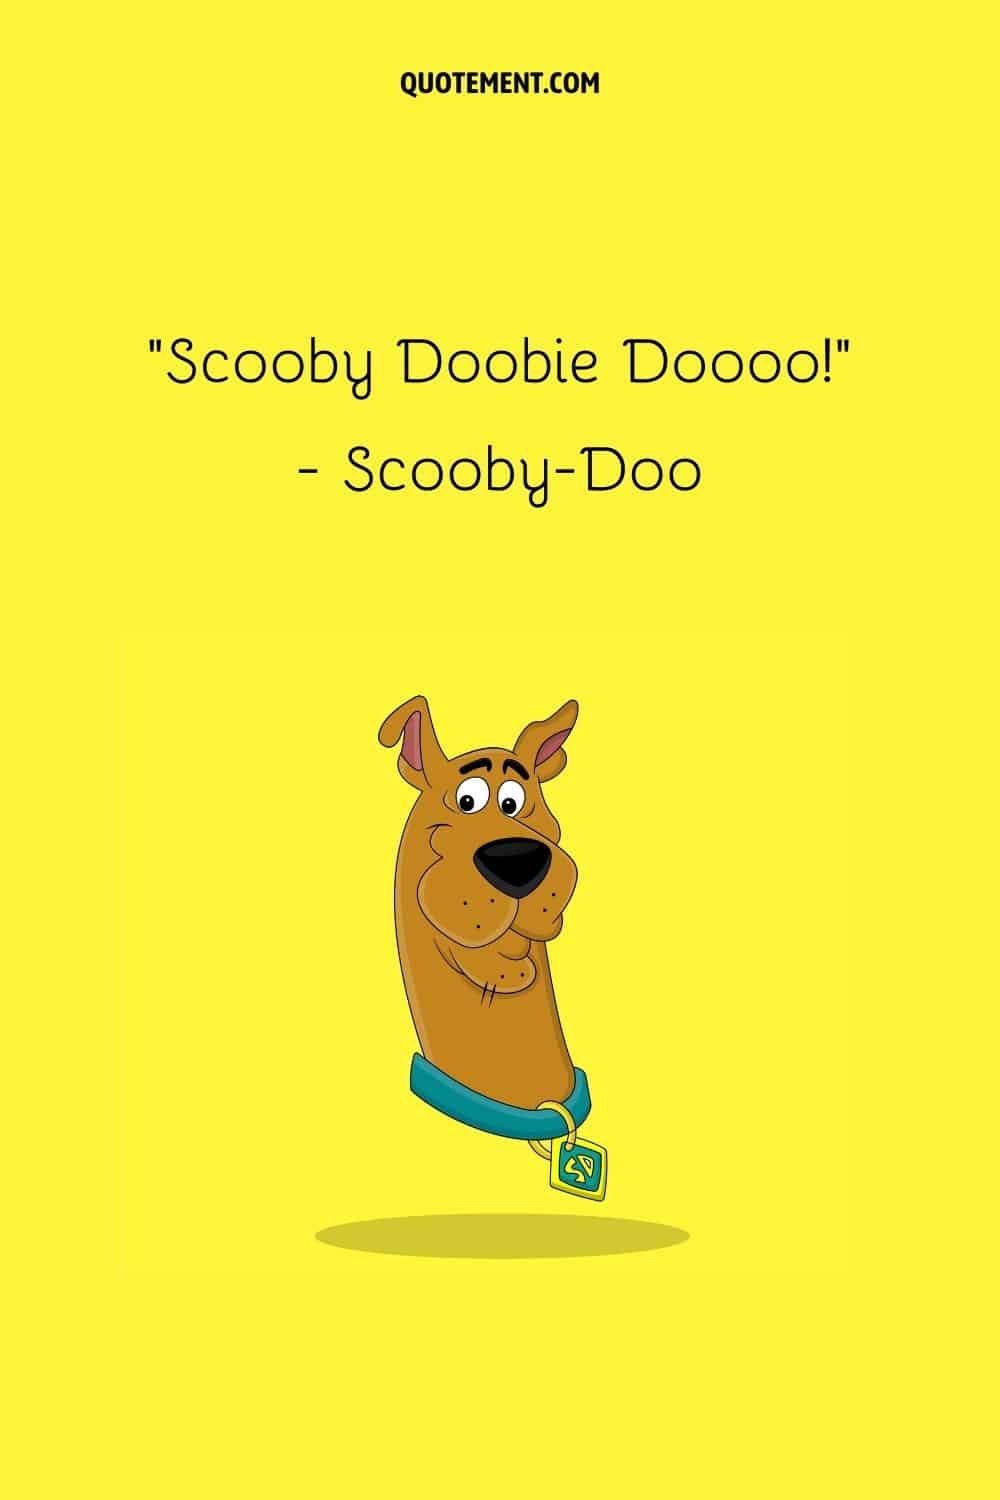 smiling Scooby-Doo image representing the most memorable Scooby-Doo quote
